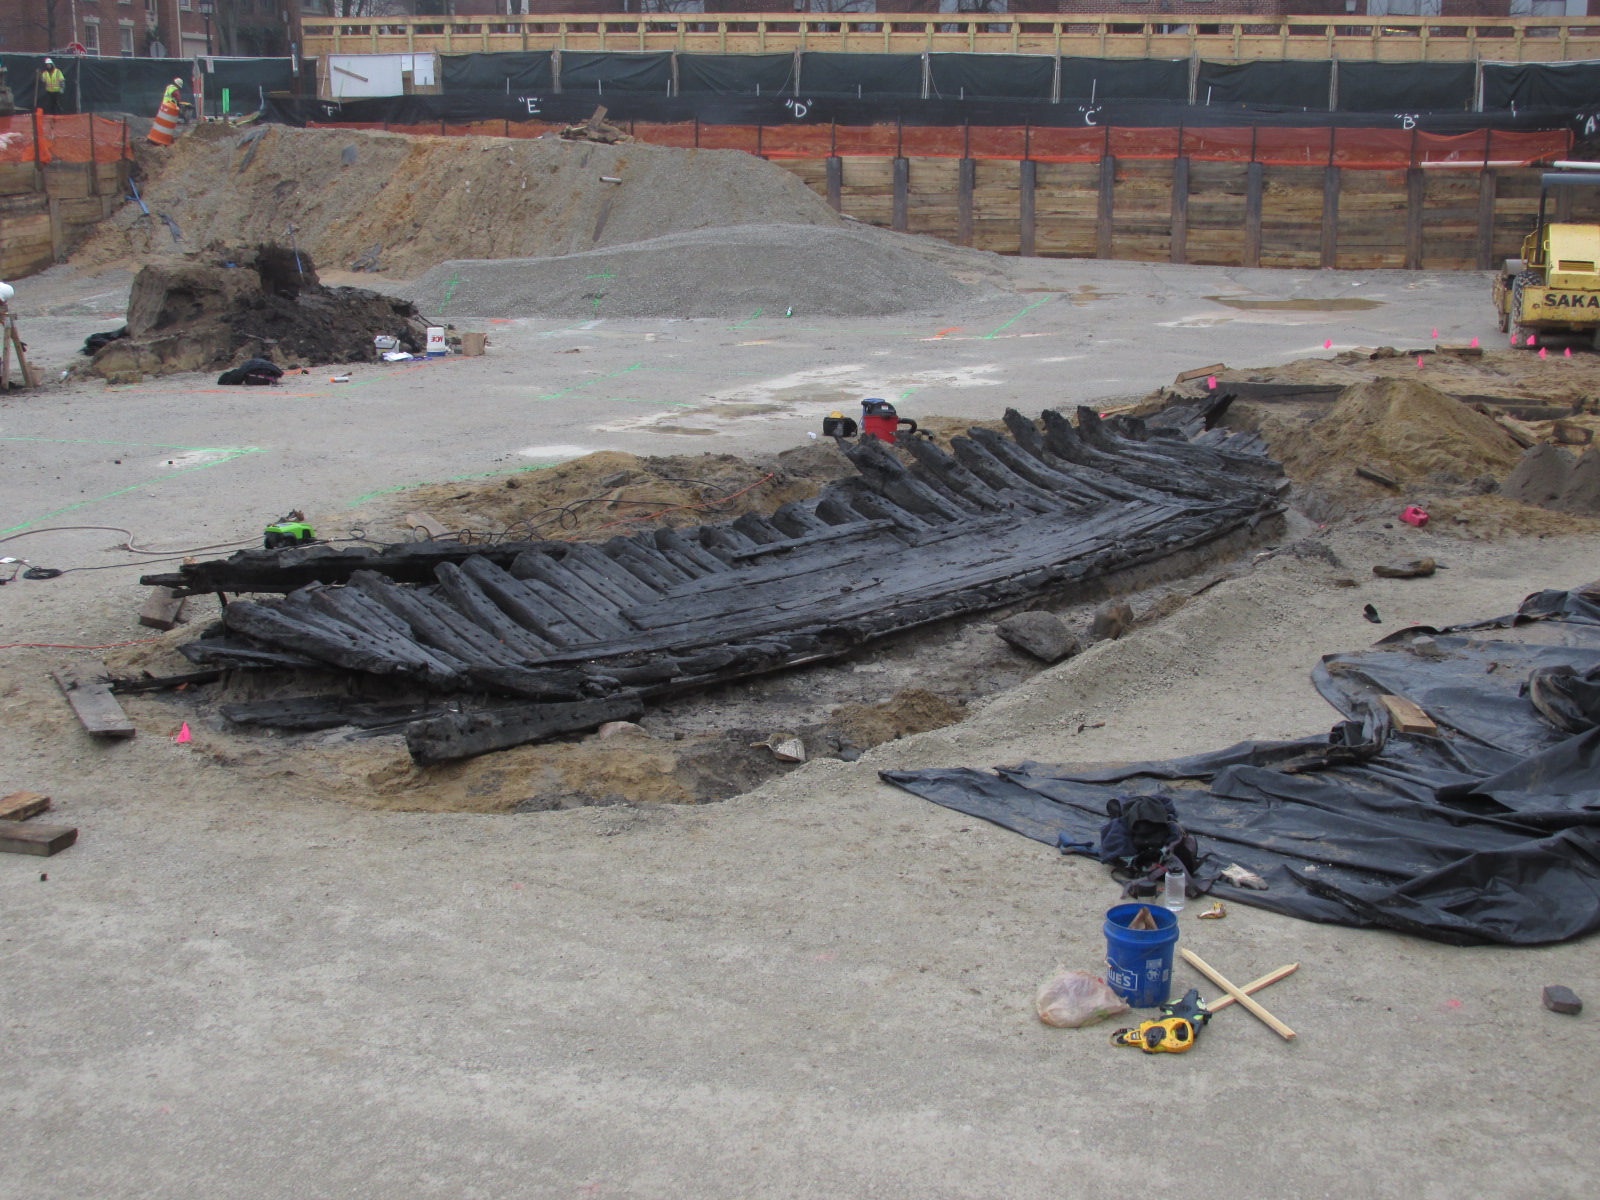  WSSI archeologists estimate that roughly 30-40% of the port side of the ship is left intact.    